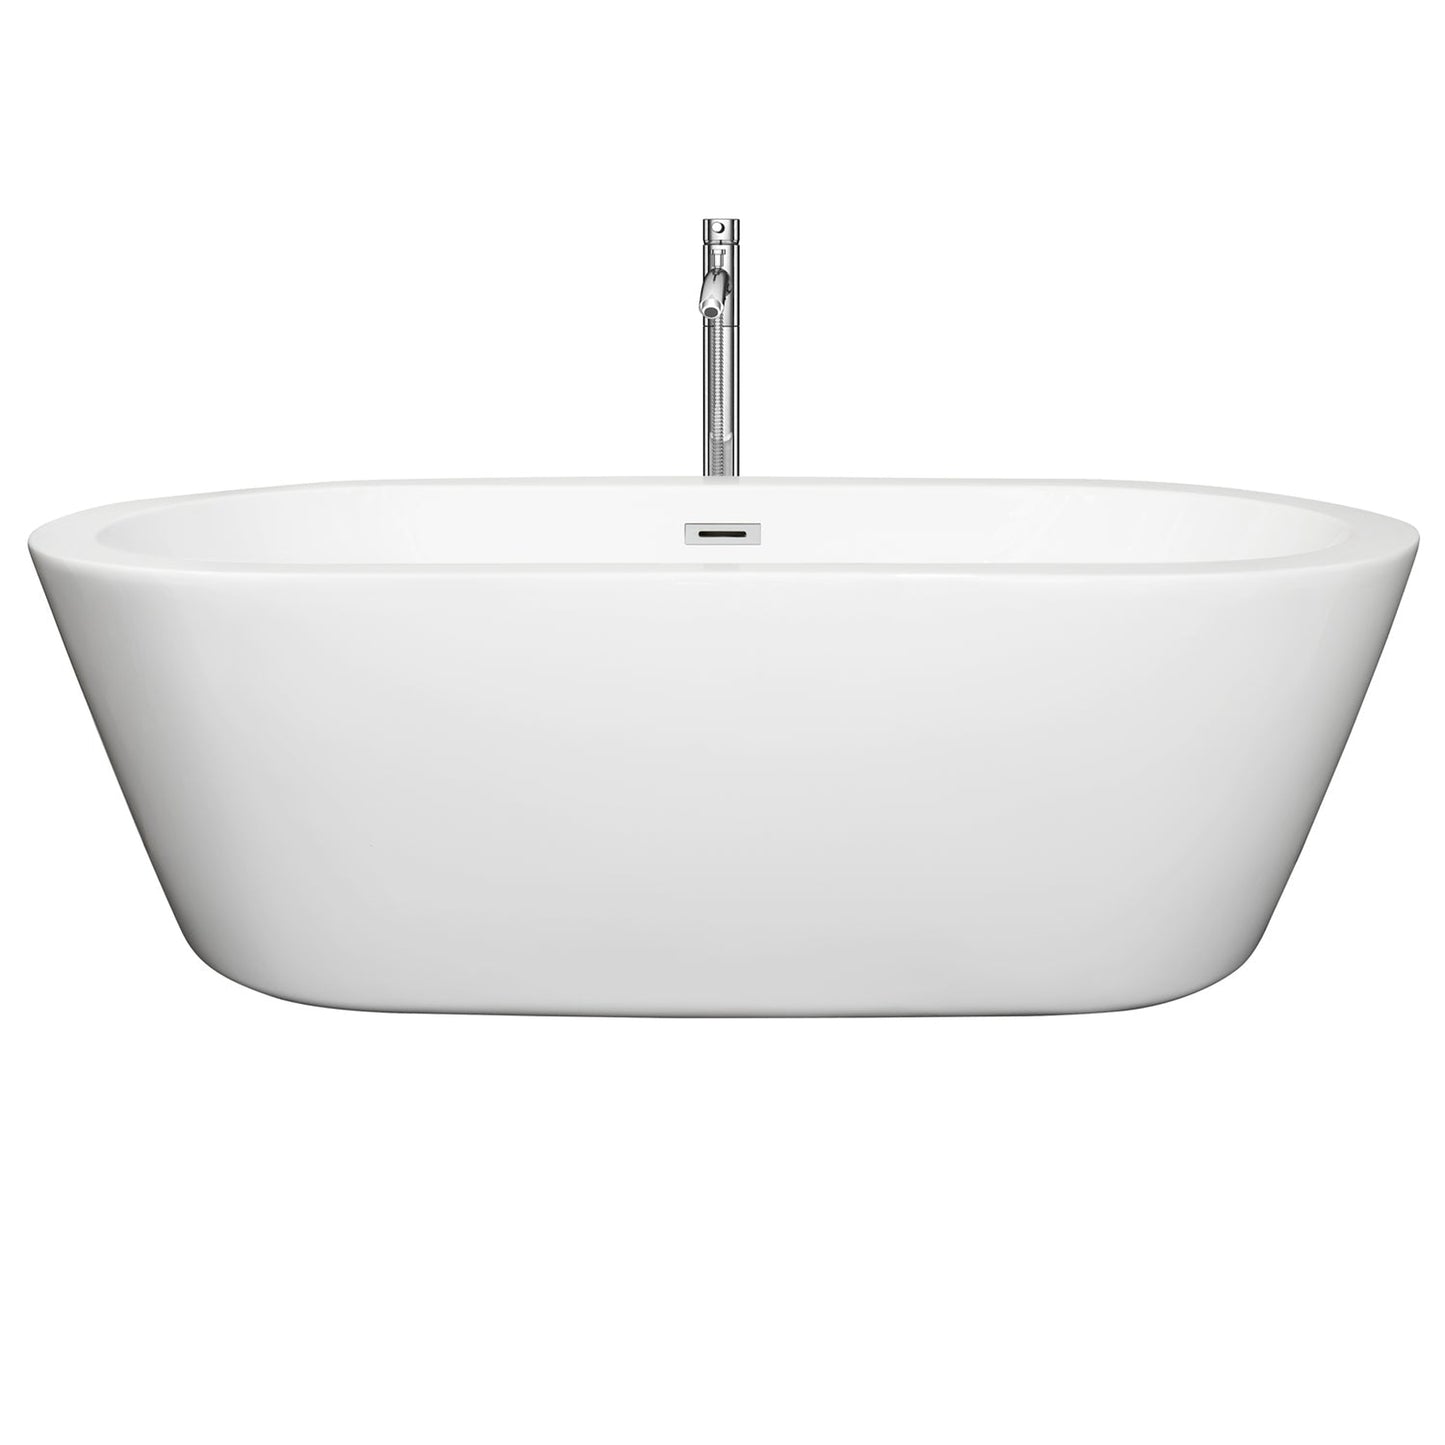 Wyndham Collection Mermaid 71" Freestanding Bathtub in White With Floor Mounted Faucet, Drain and Overflow Trim in Polished Chrome